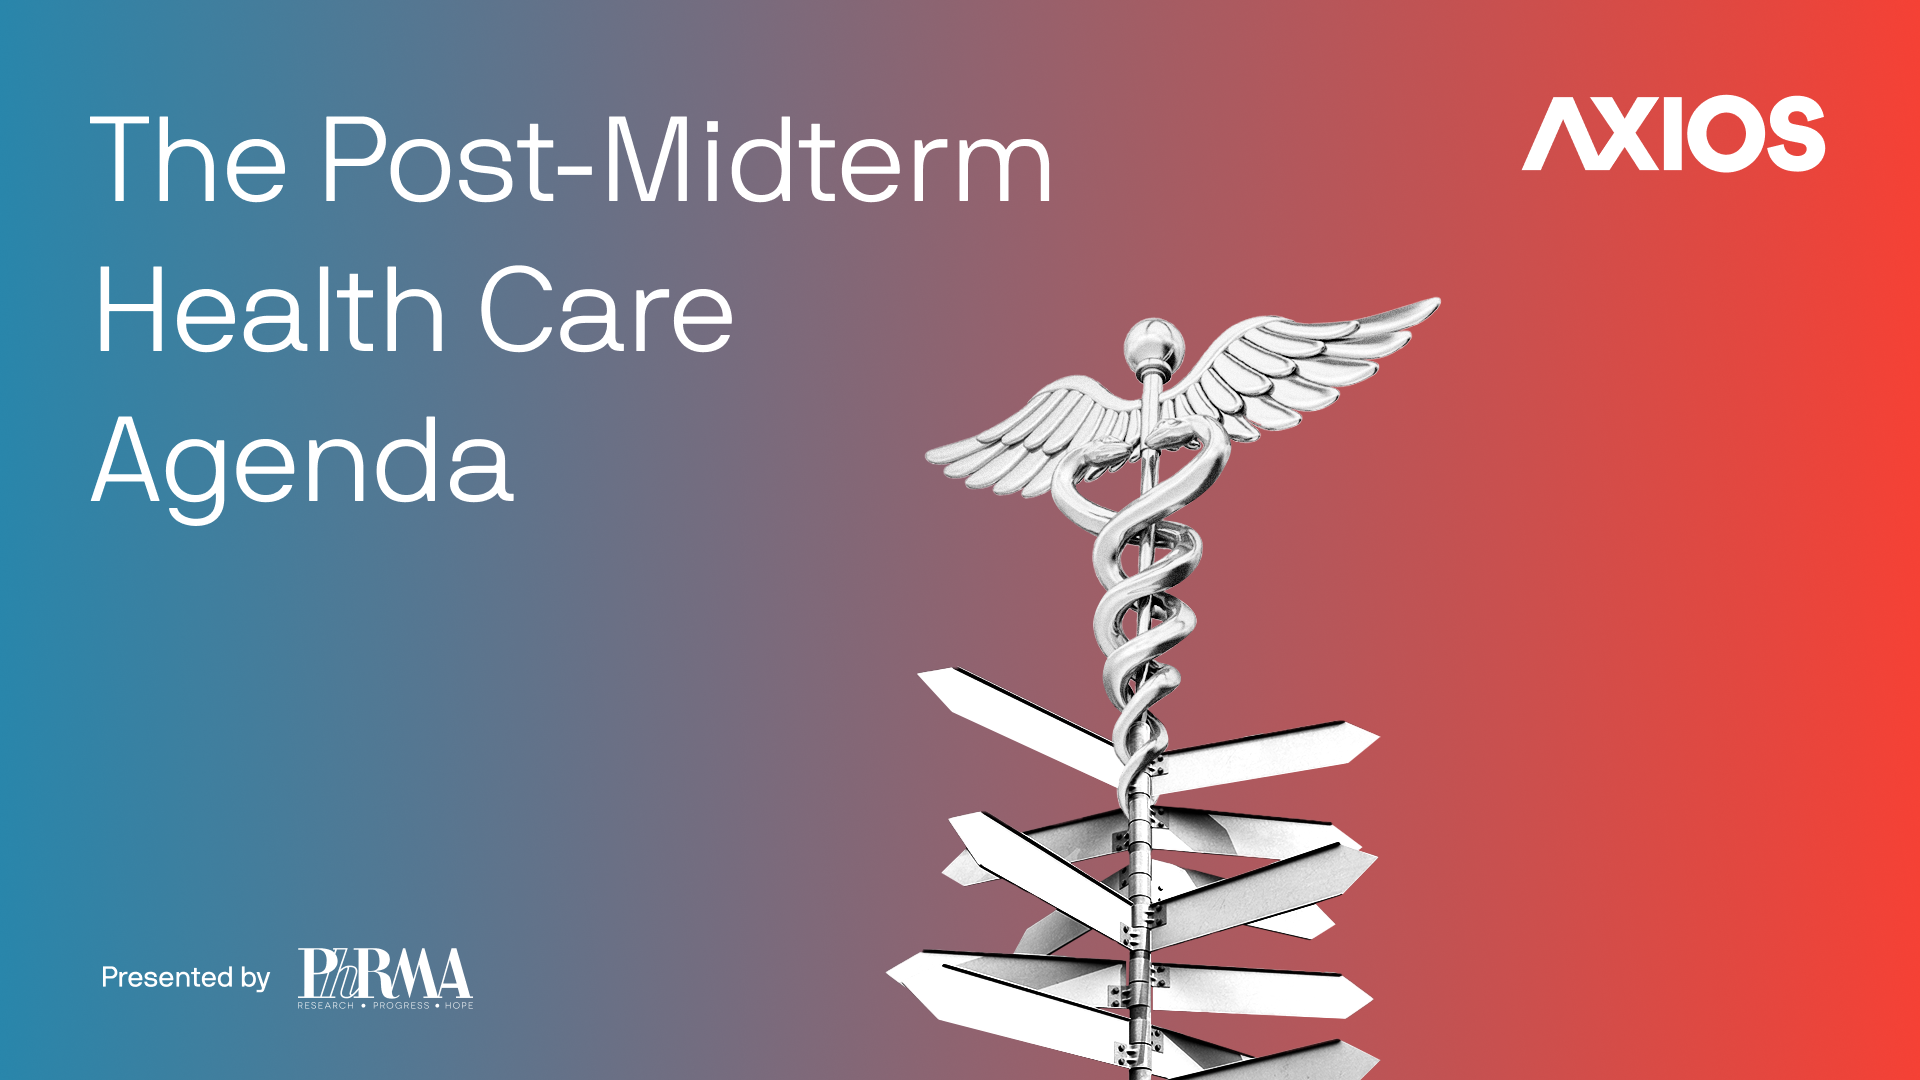 The Post-Midterm Health Care Agenda. Presented by Phrma. Caduceus symbol on top a sign pointing different directions.